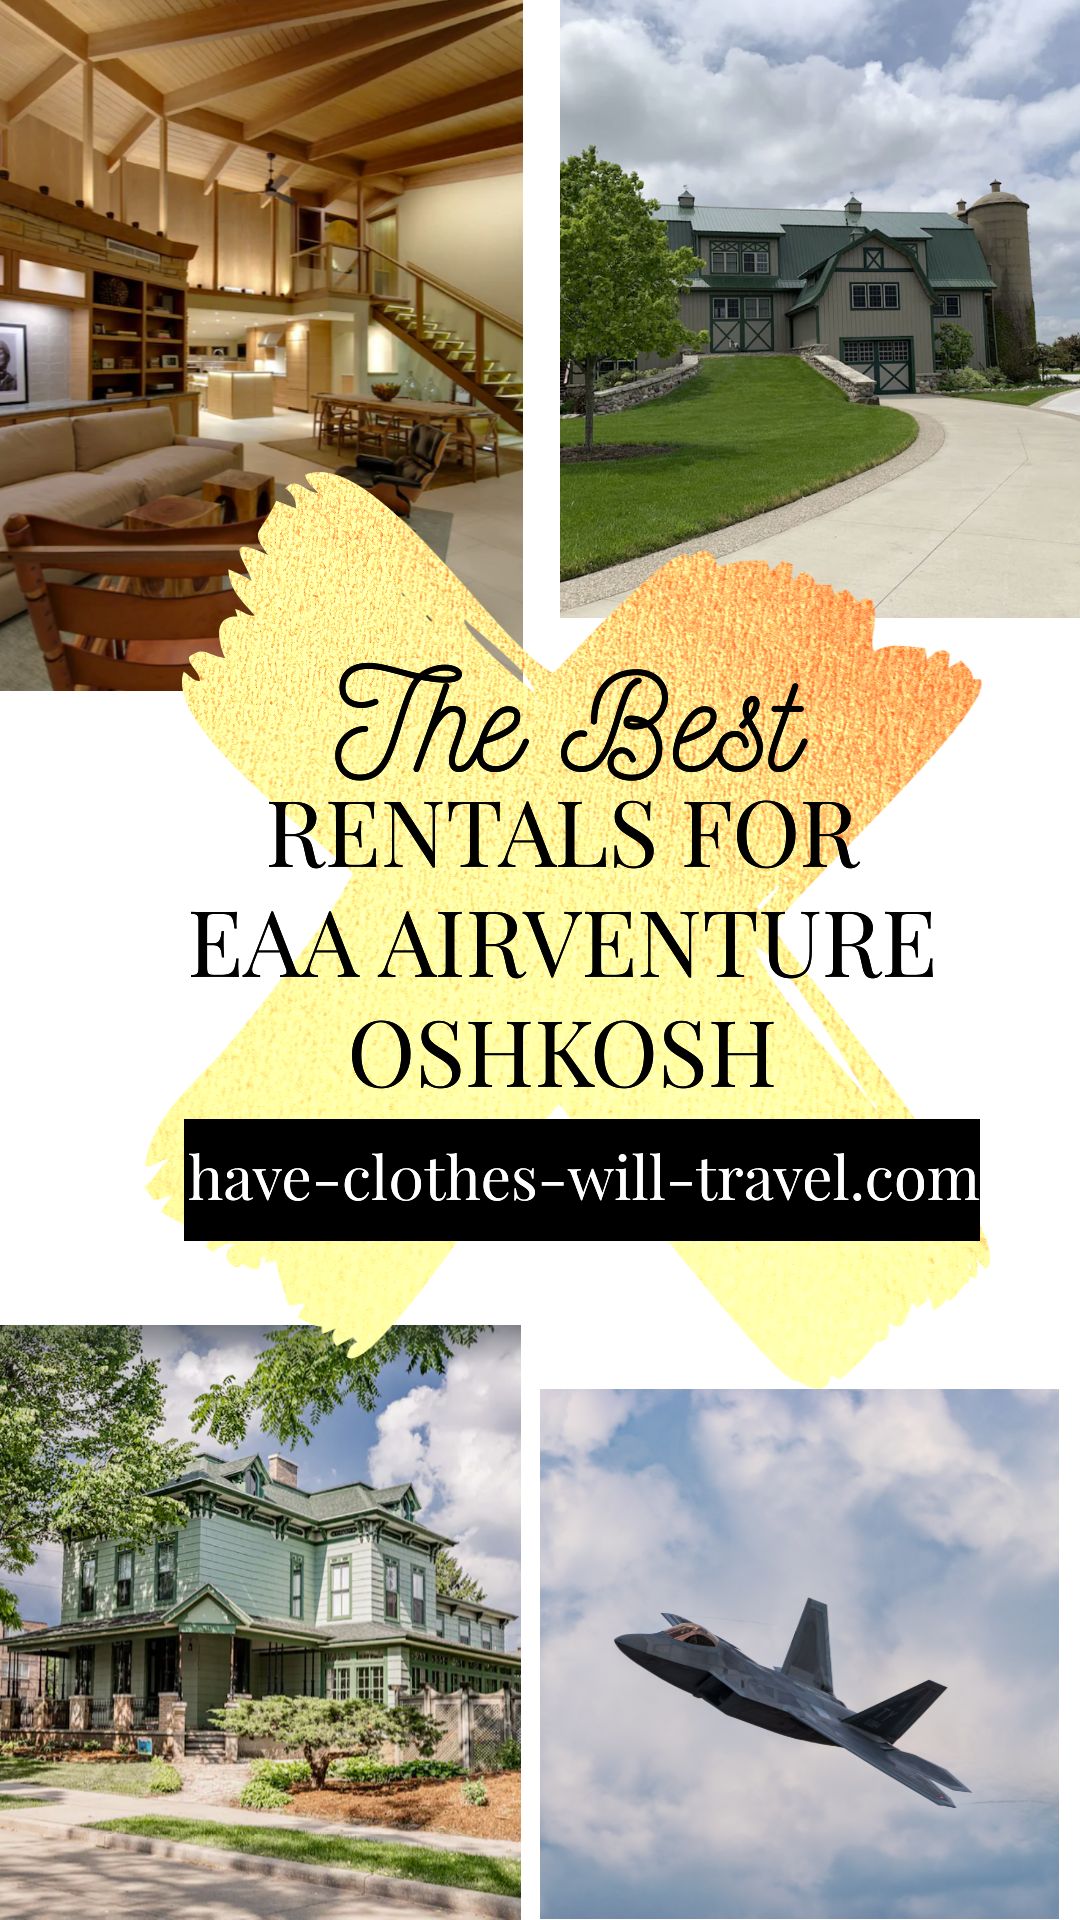 A collage of images show different rental homes located near the EAA in Oshkosh, Wisconsin. A fourth image shows an old fighter jet flying in a blue cloudy sky. text across the center of the image reads "the best rentals for EAA airventure in Oshkosh"